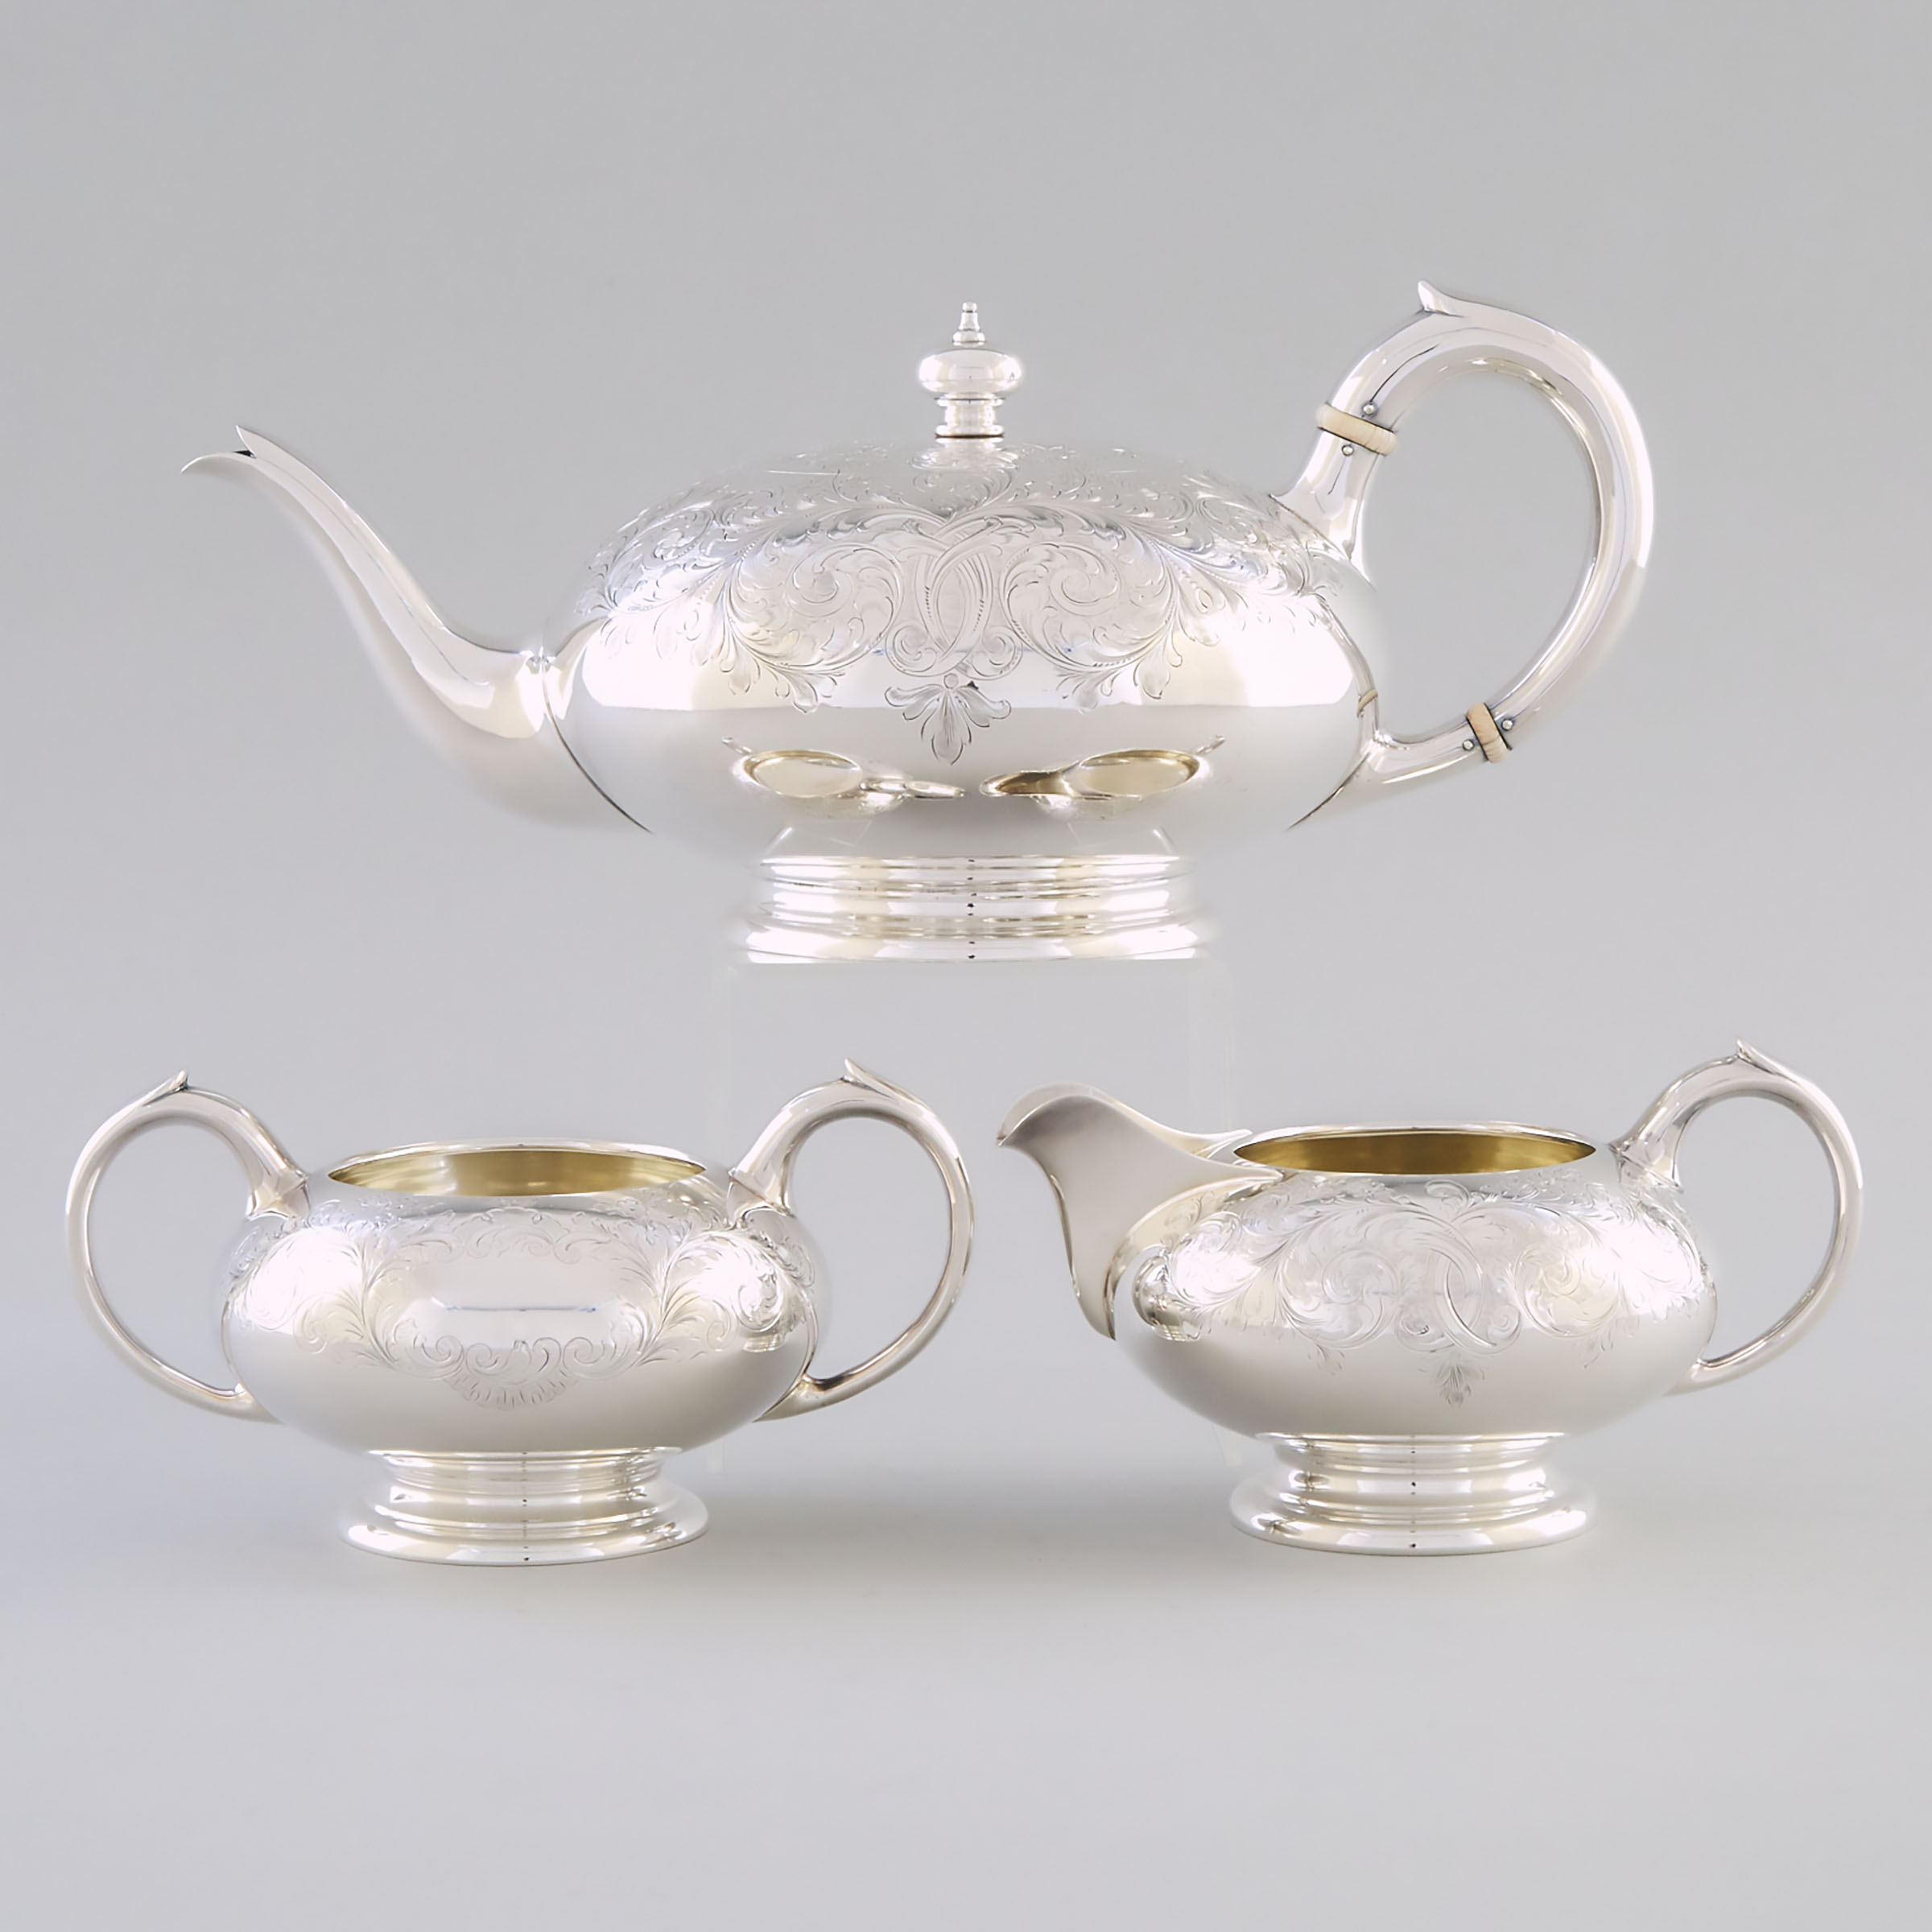 Canadian Silver Tea Service, Henry Birks & Sons, Montreal, Que., 1926